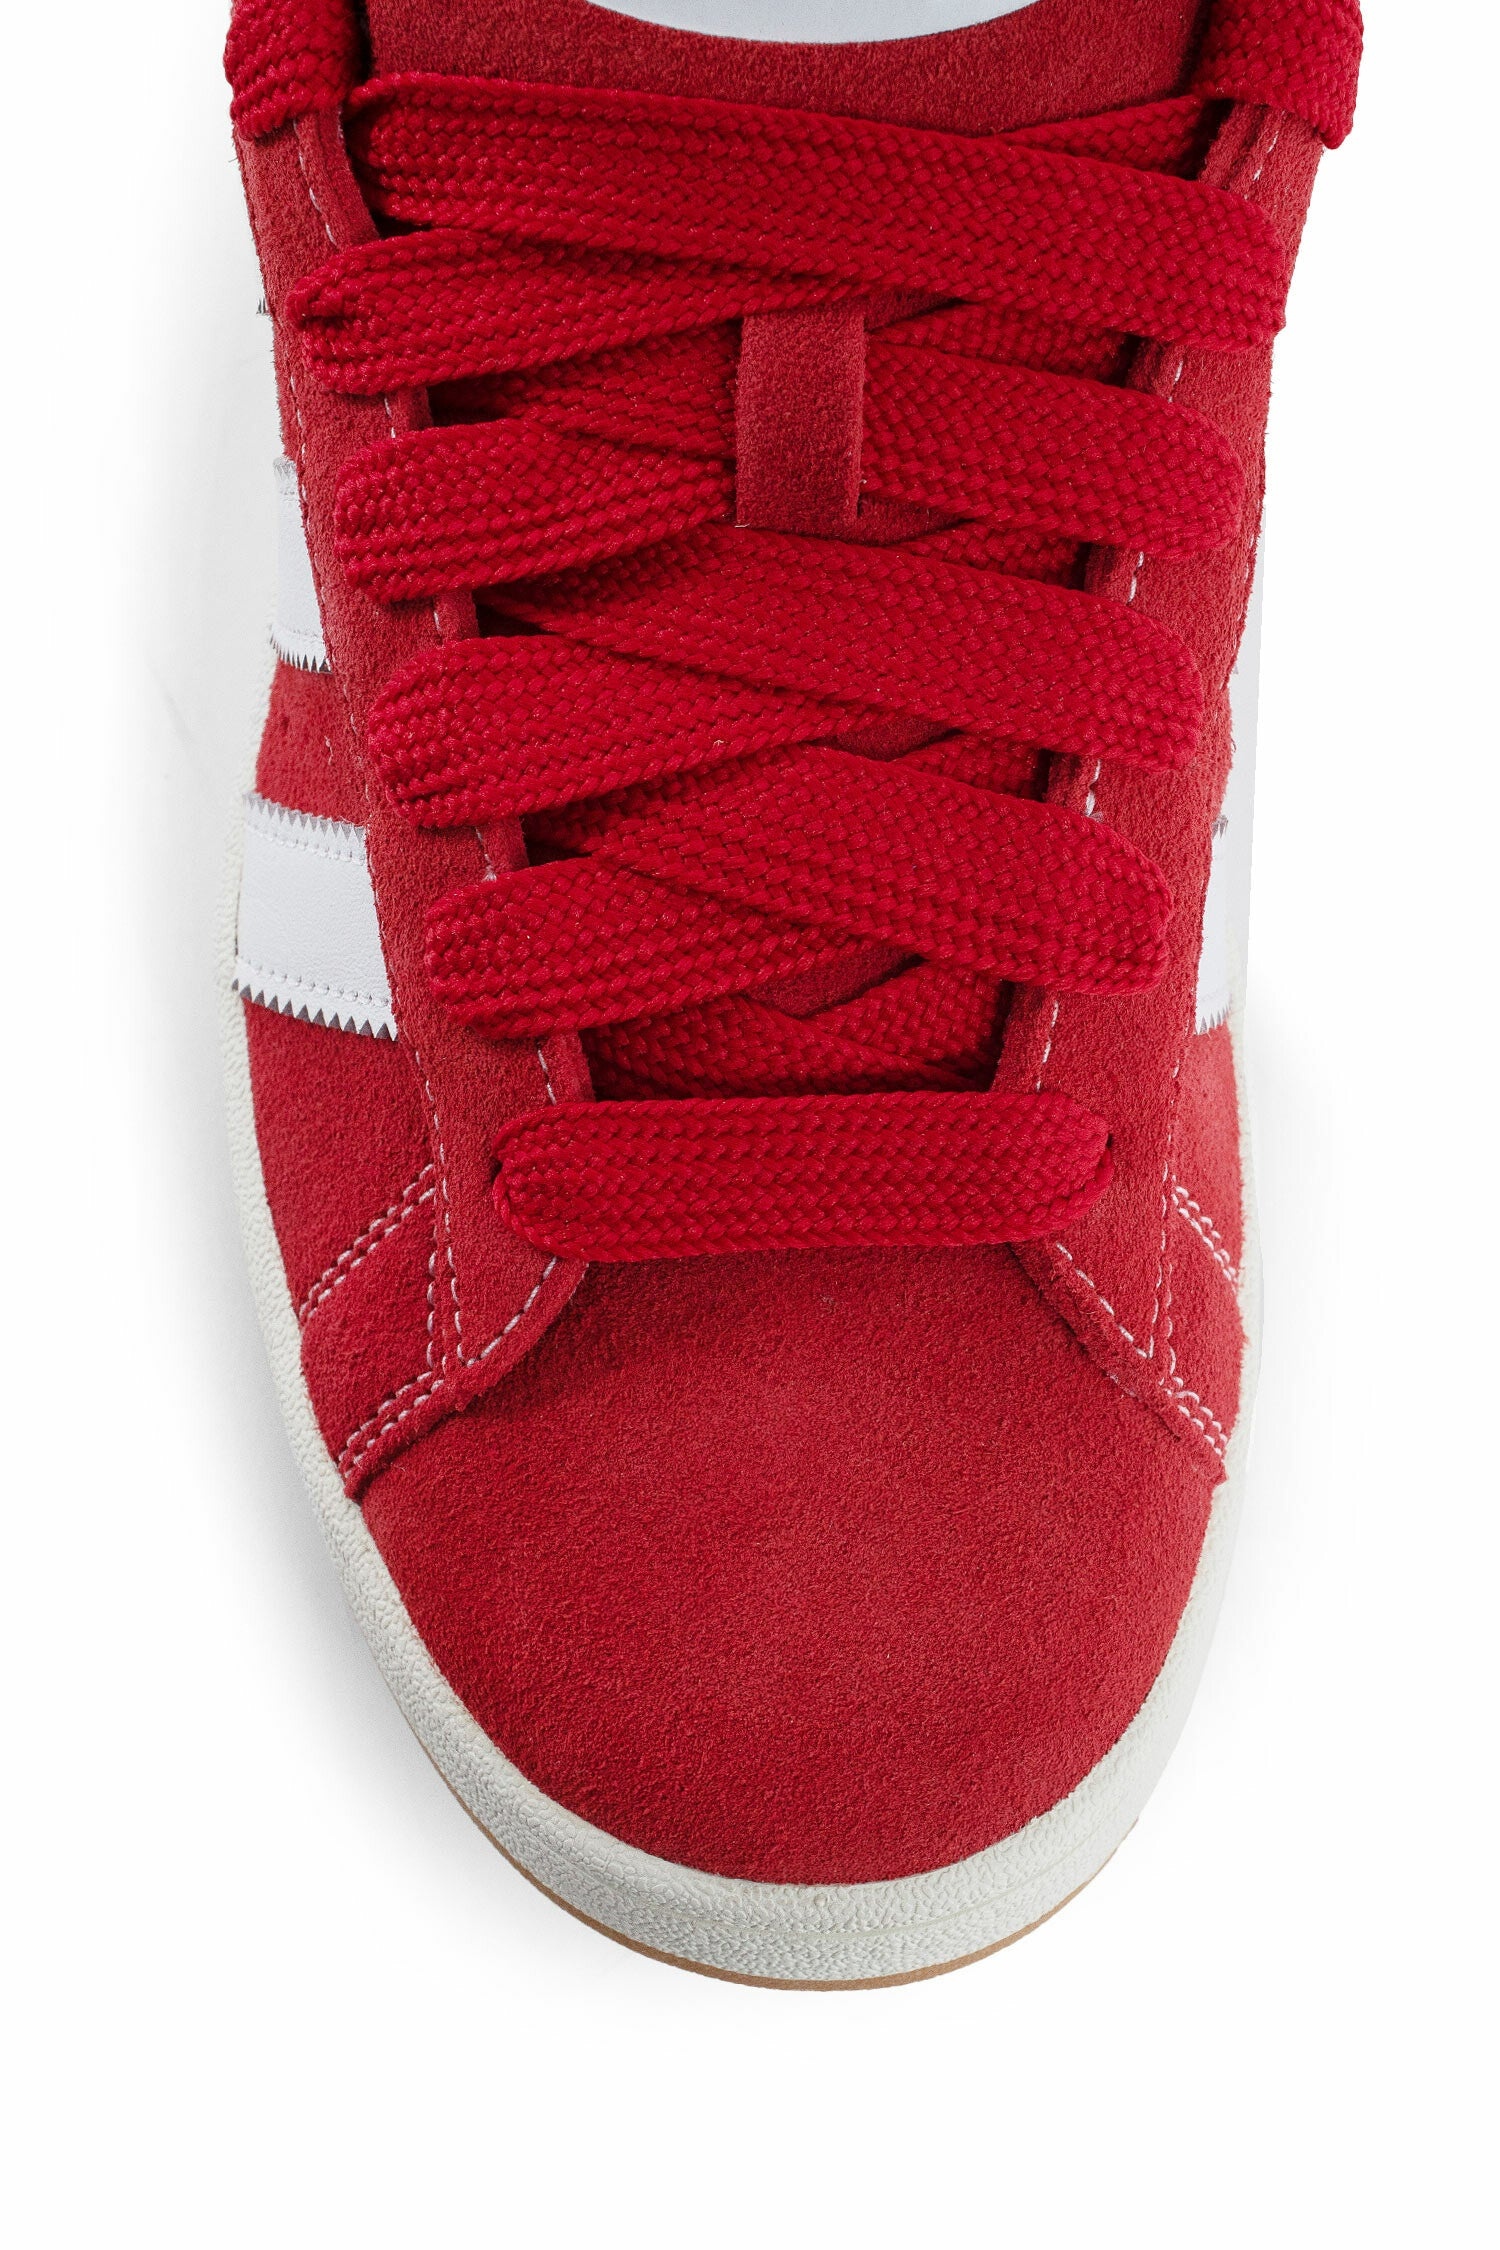 ADIDAS UNISEX RED SNEAKERS - 5